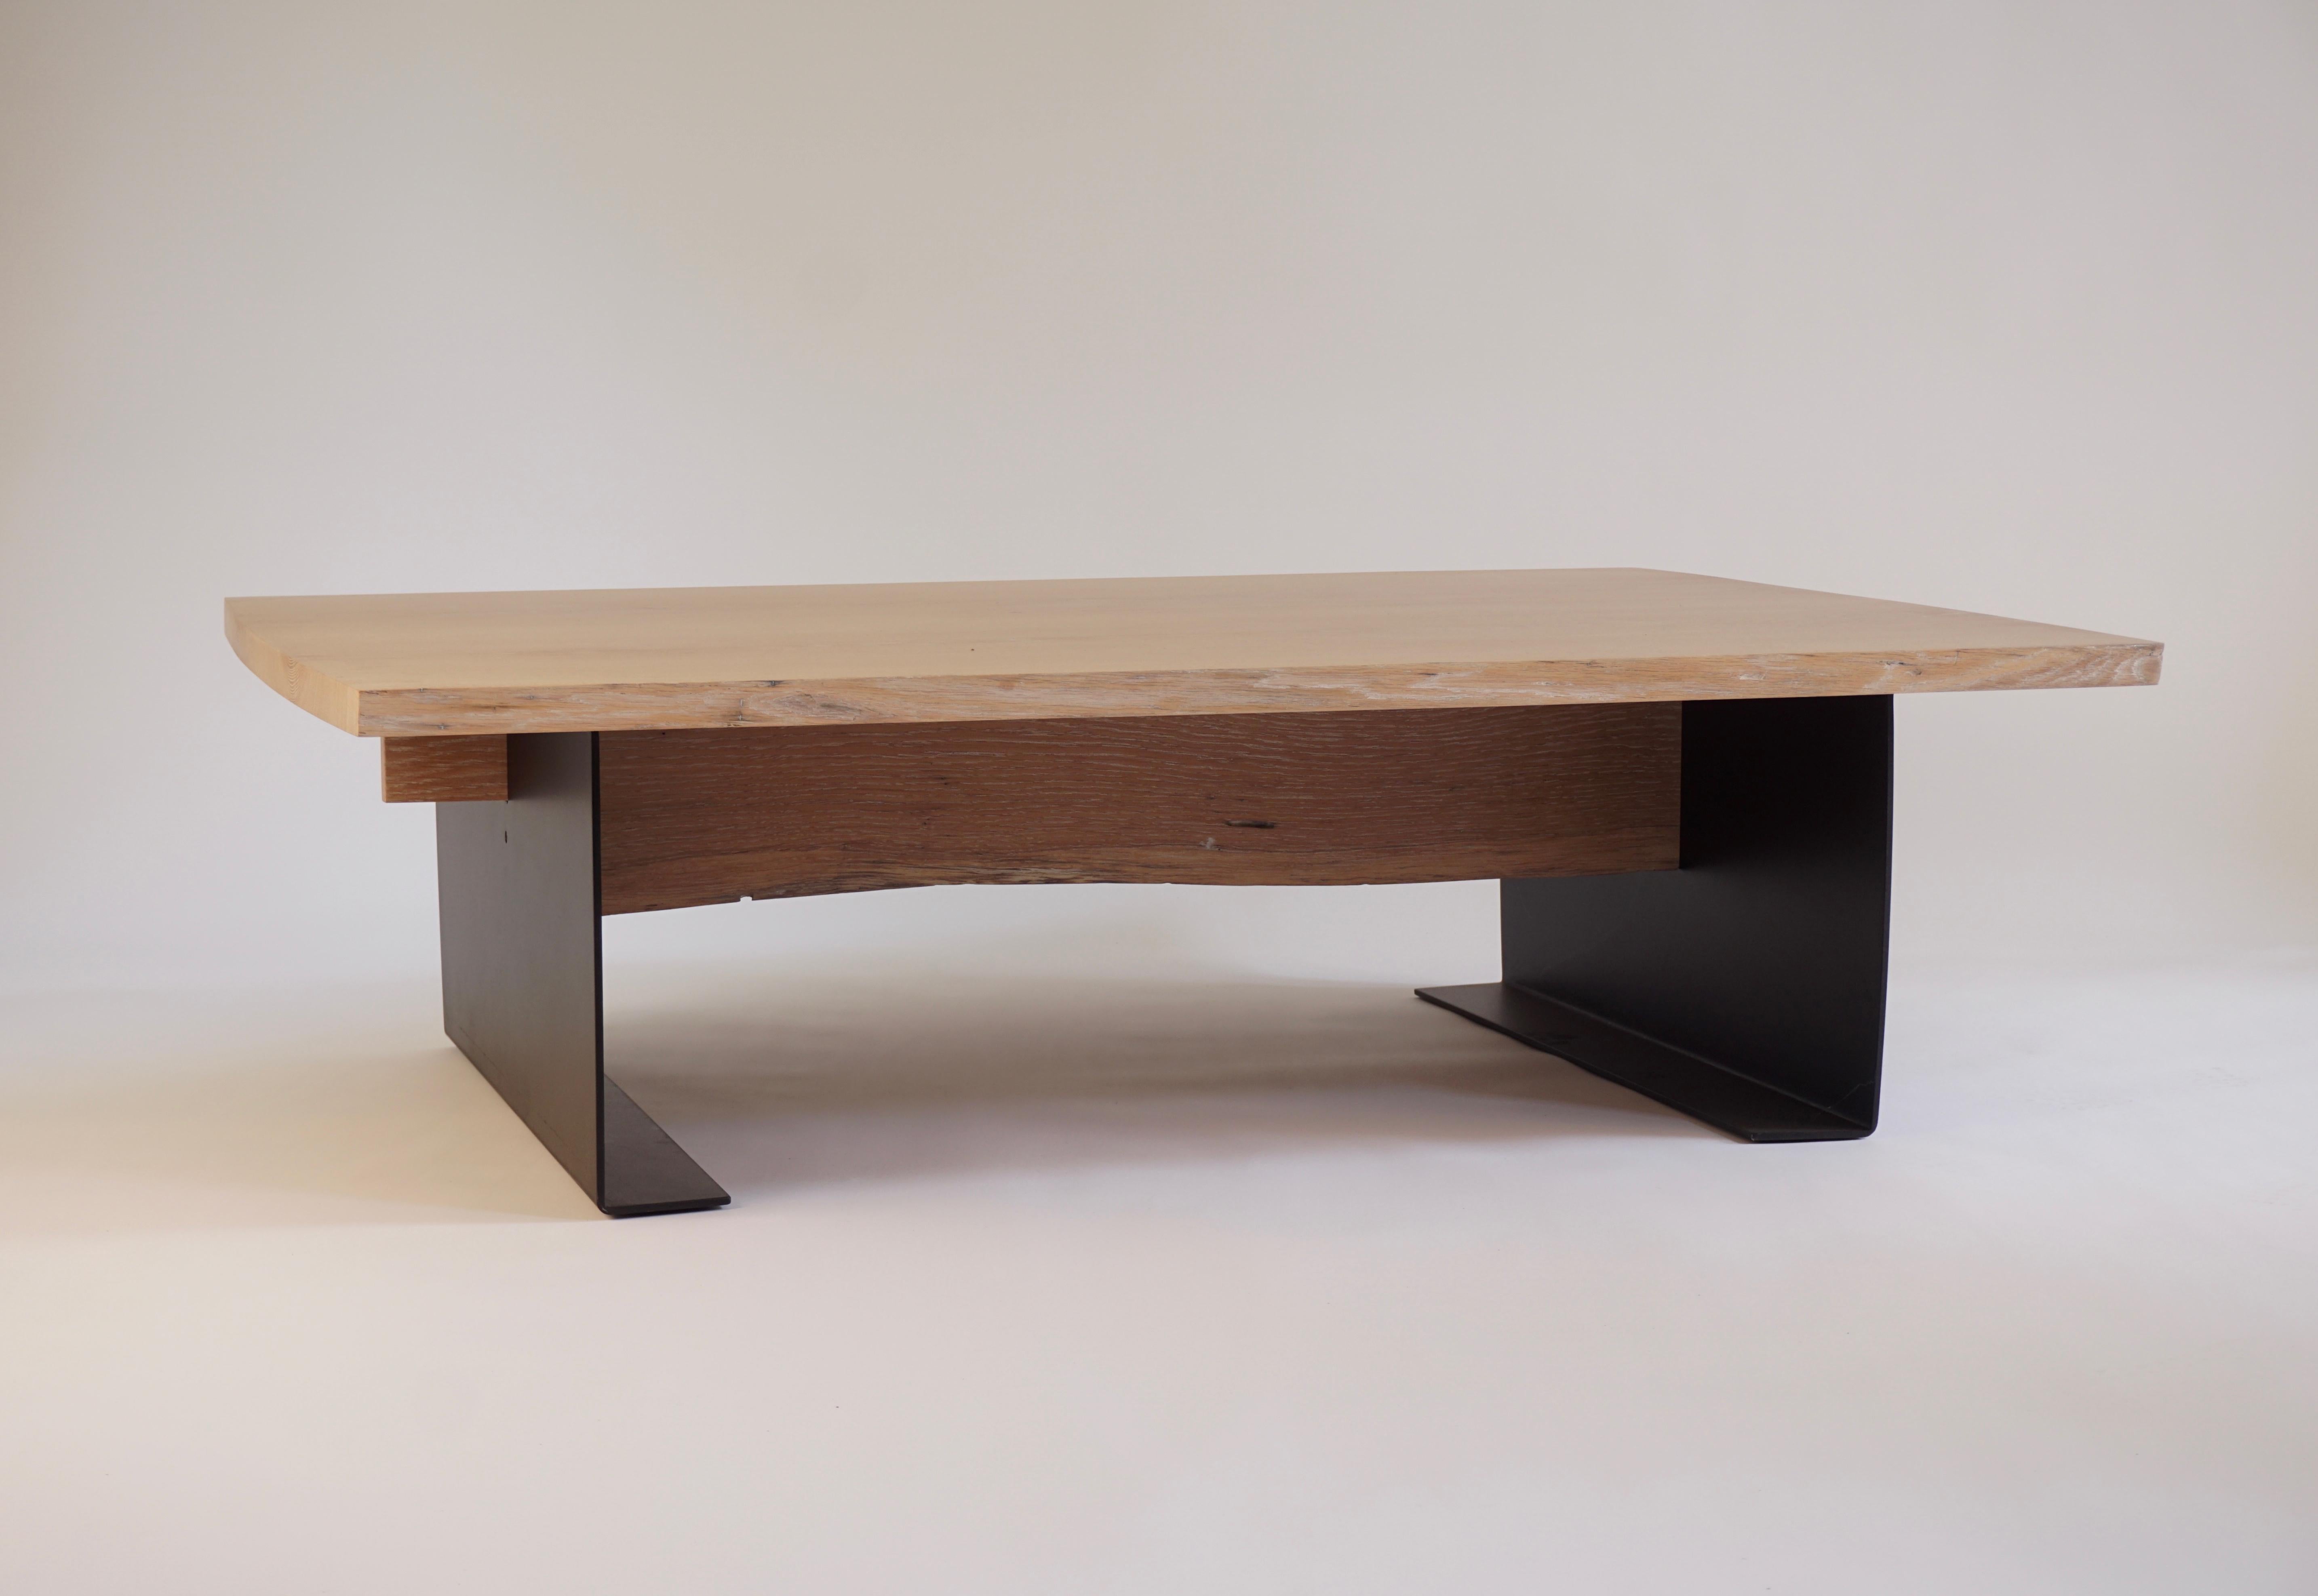 This trestle coffee table by Chris Lehrecke is made in white oak with a white washed finish. This version of the Trestle Coffee Table is from the 2005 Trestle Collection. The book matched white oak planks for this table were locally sourced from the